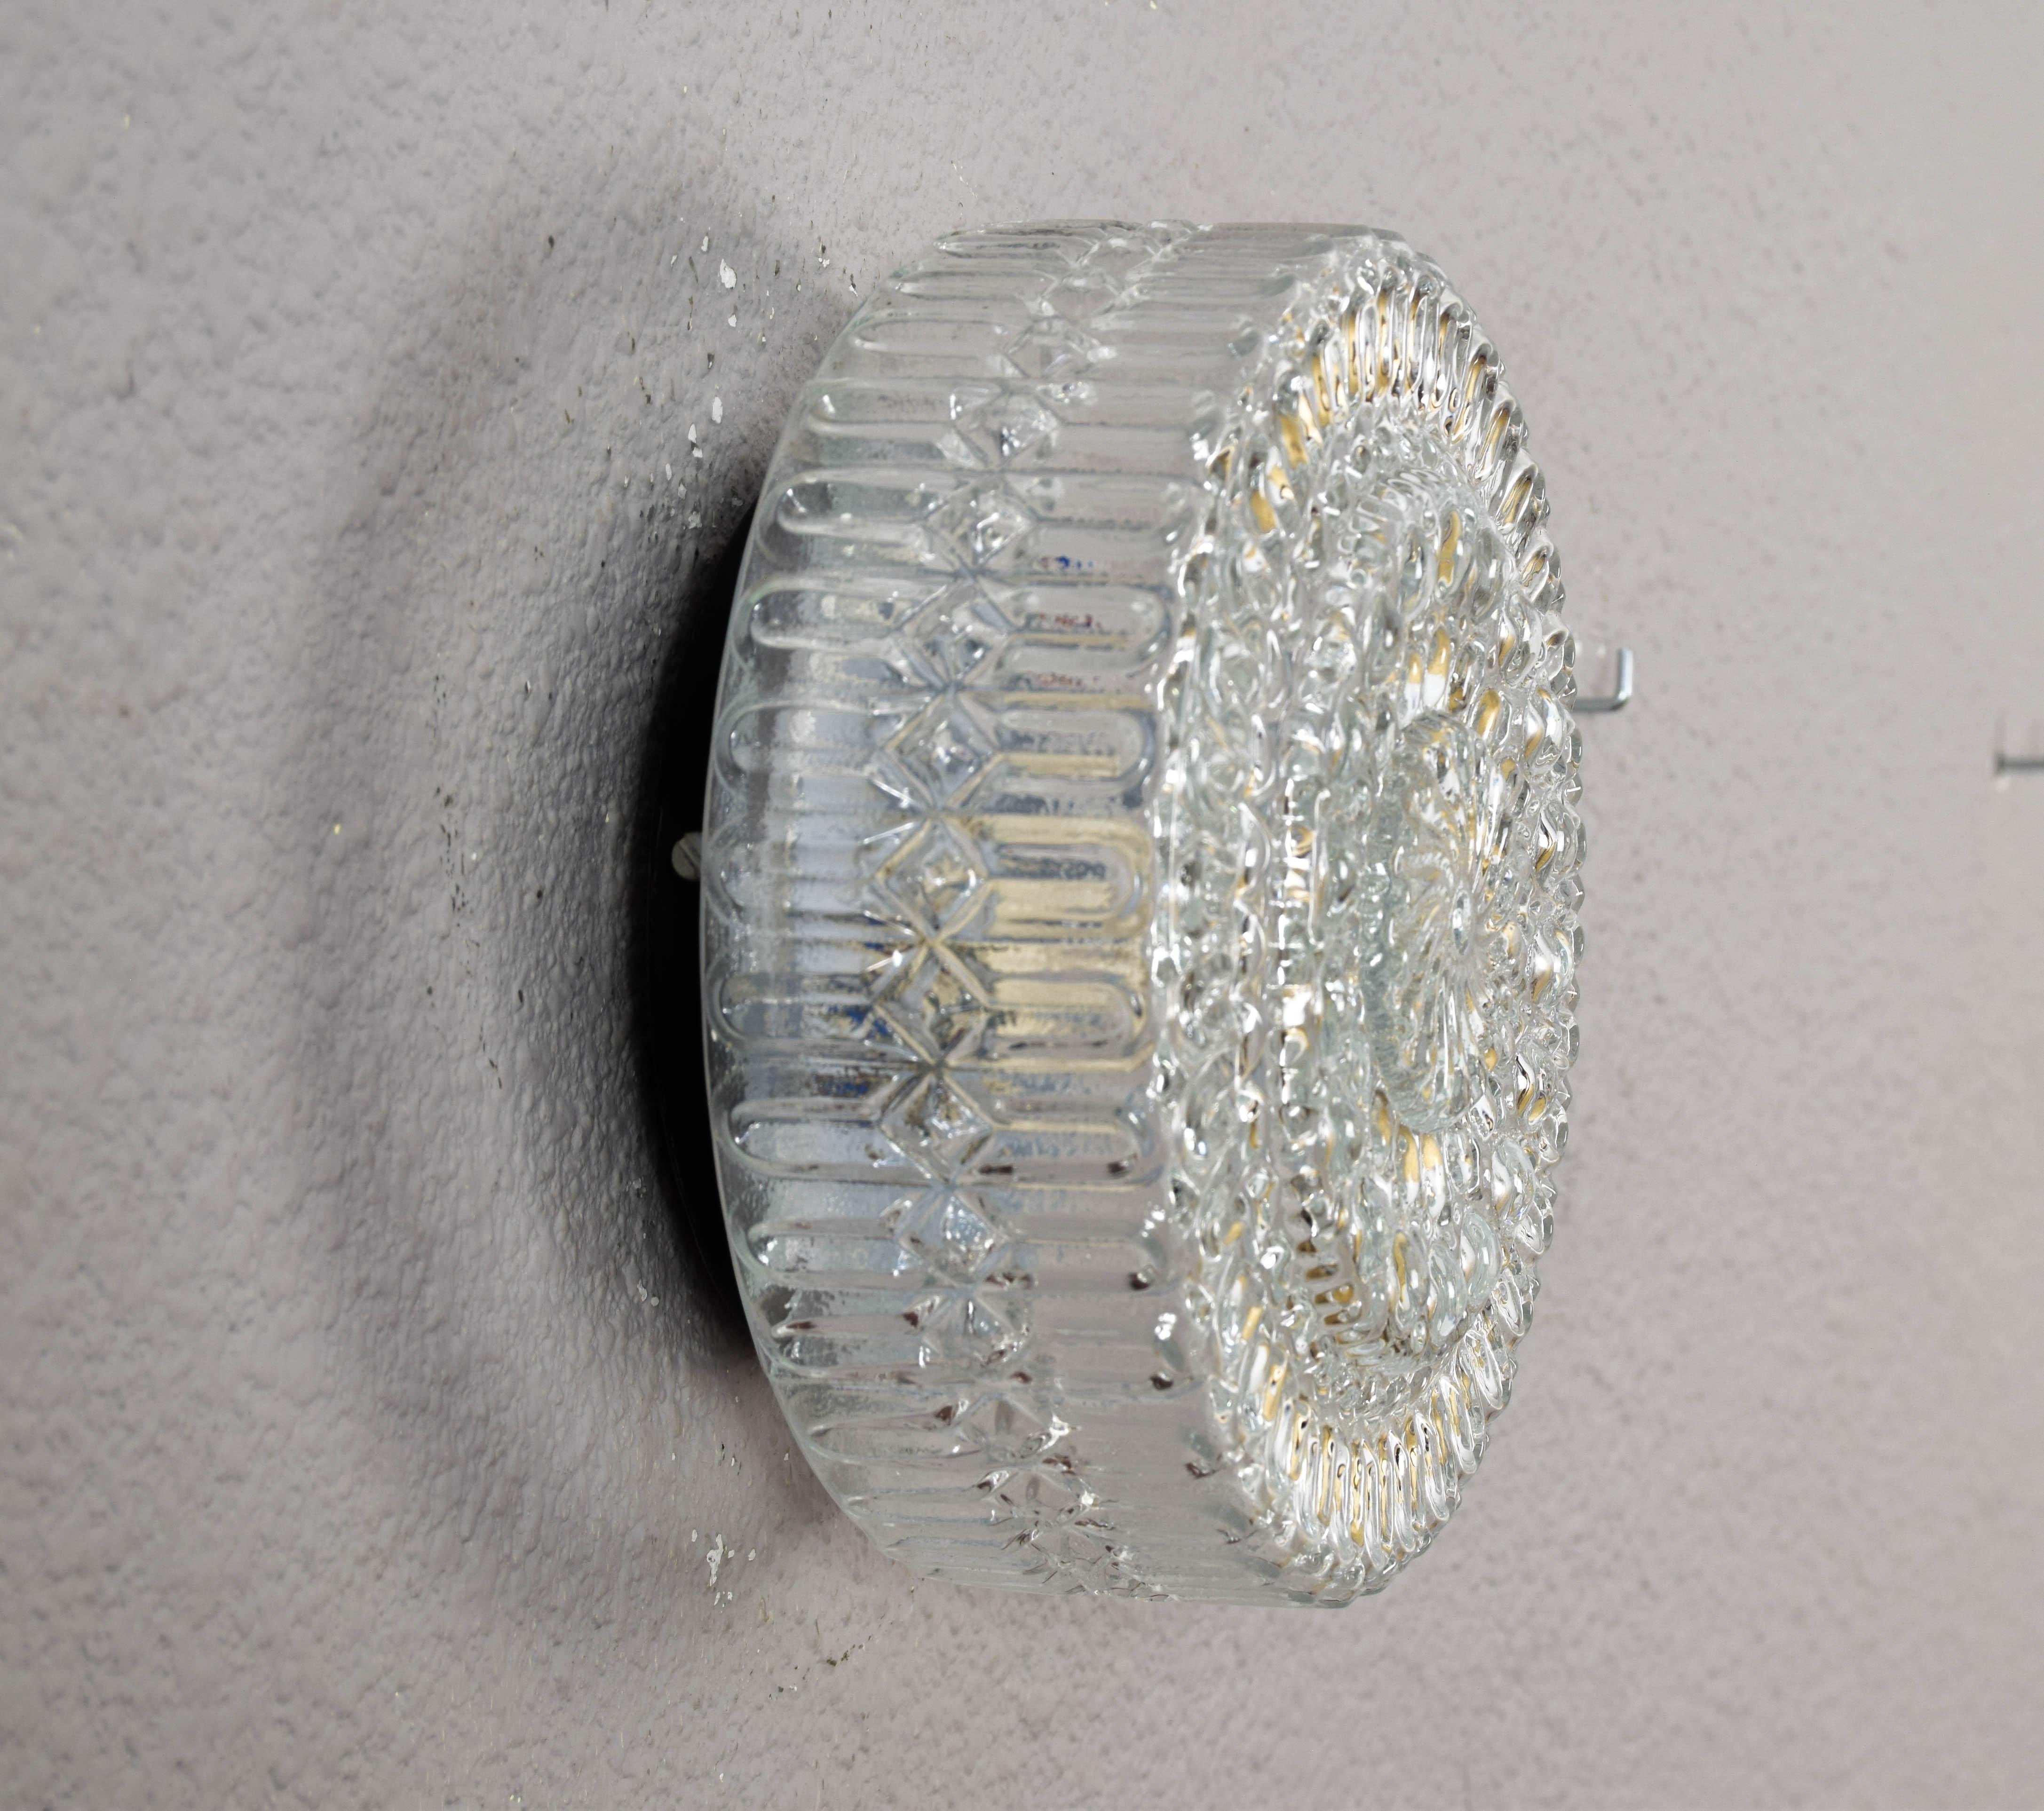 Beautiful wall light or flush mount lamps of Germany origin manufactured in the 1960s.
Circular in shape and made of transparent cut glass, they consist of an E27 light bulb socket.
The shapes of the glass create a very pleasant effect of light